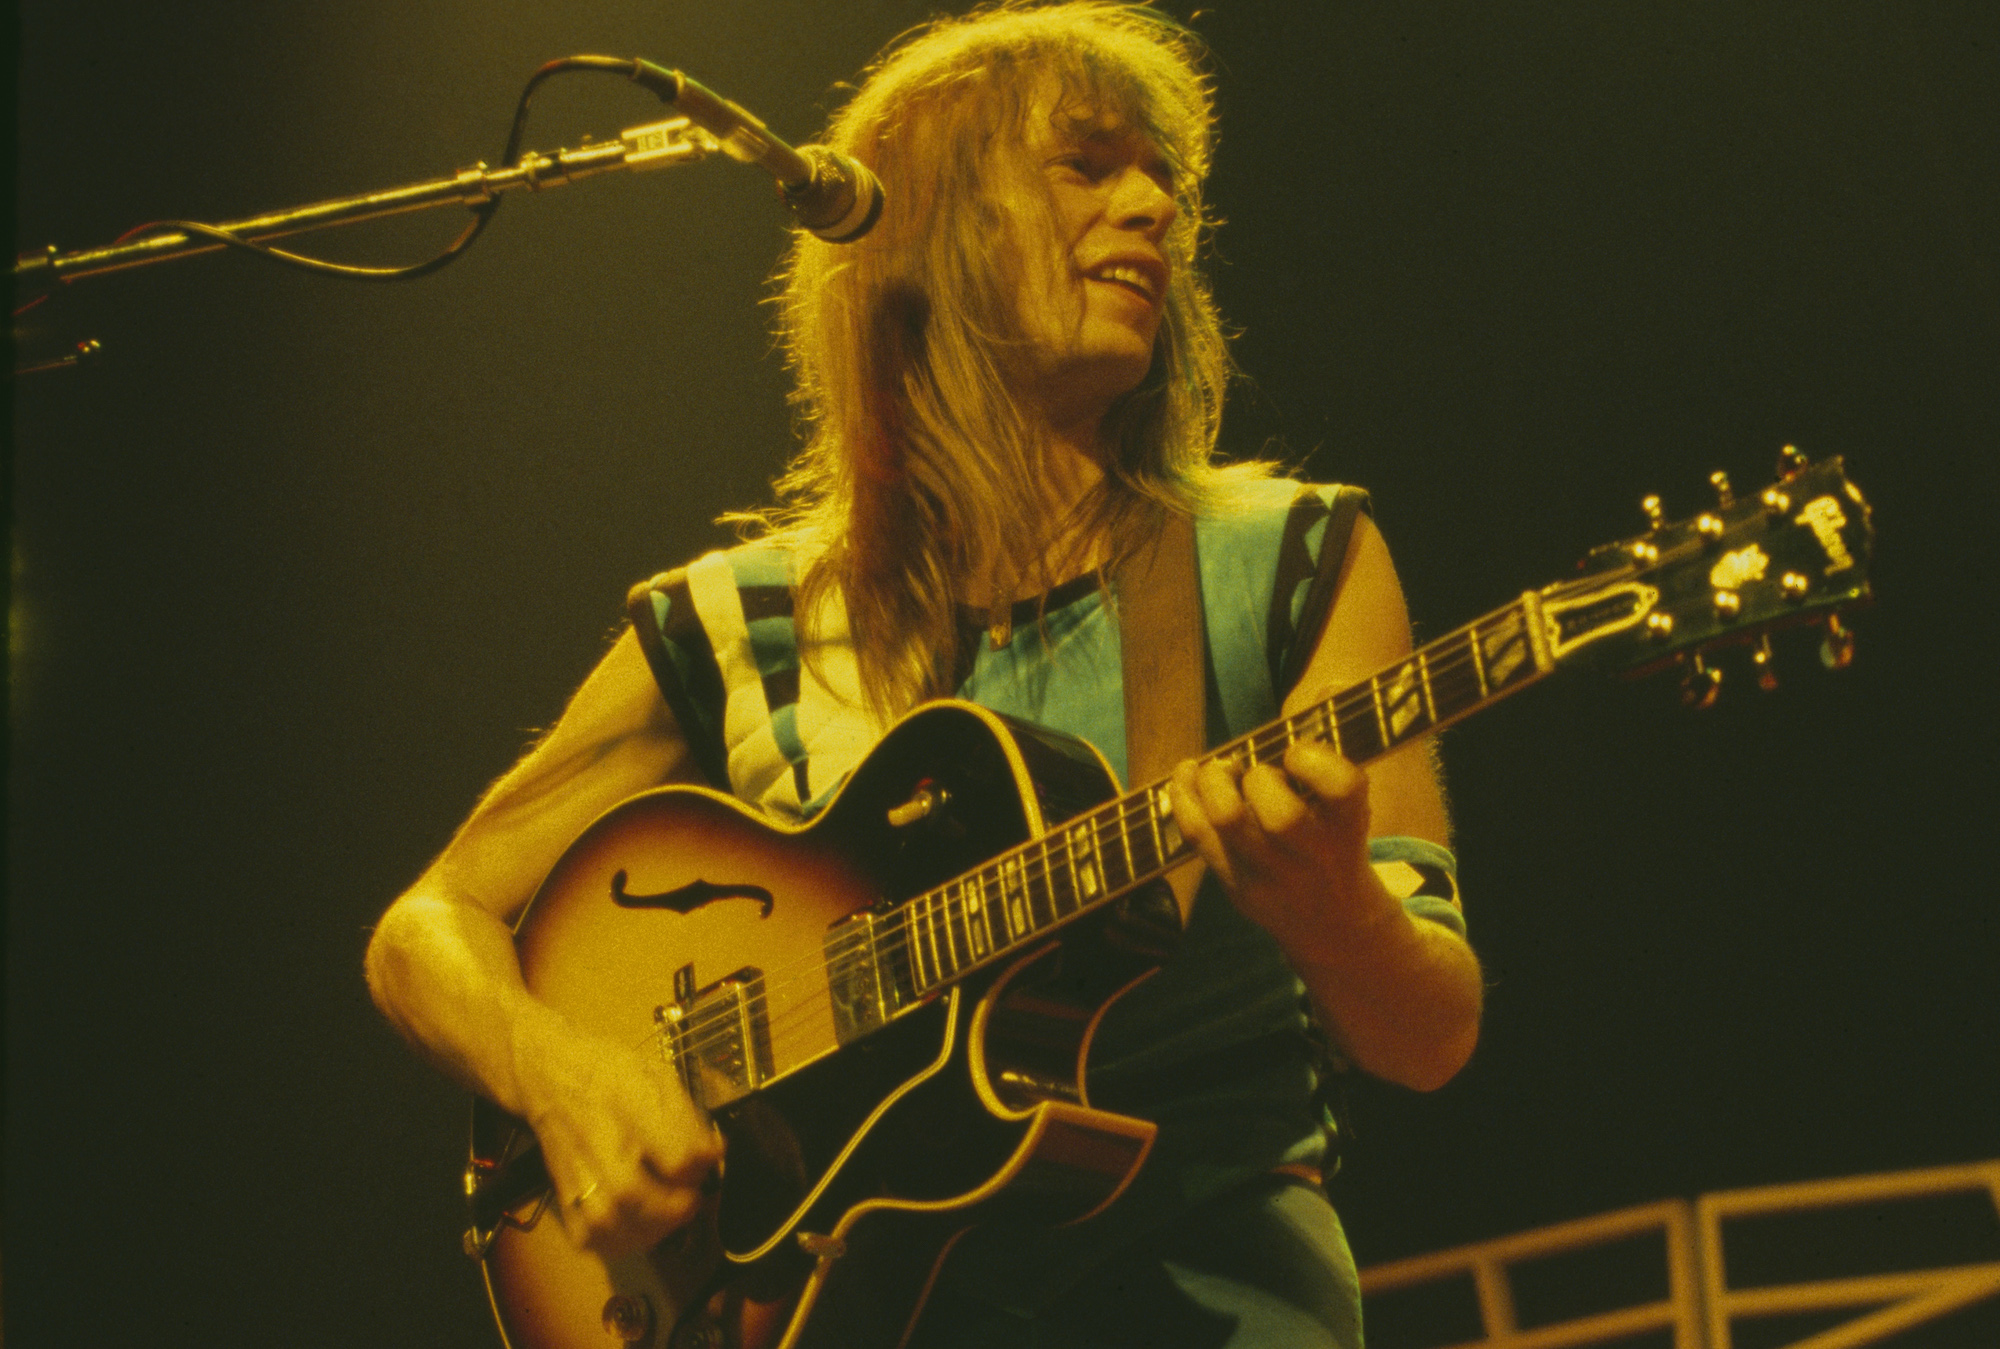 Steve Howe performs with Yes at Madison Square Garden in New York City on August 5, 1977